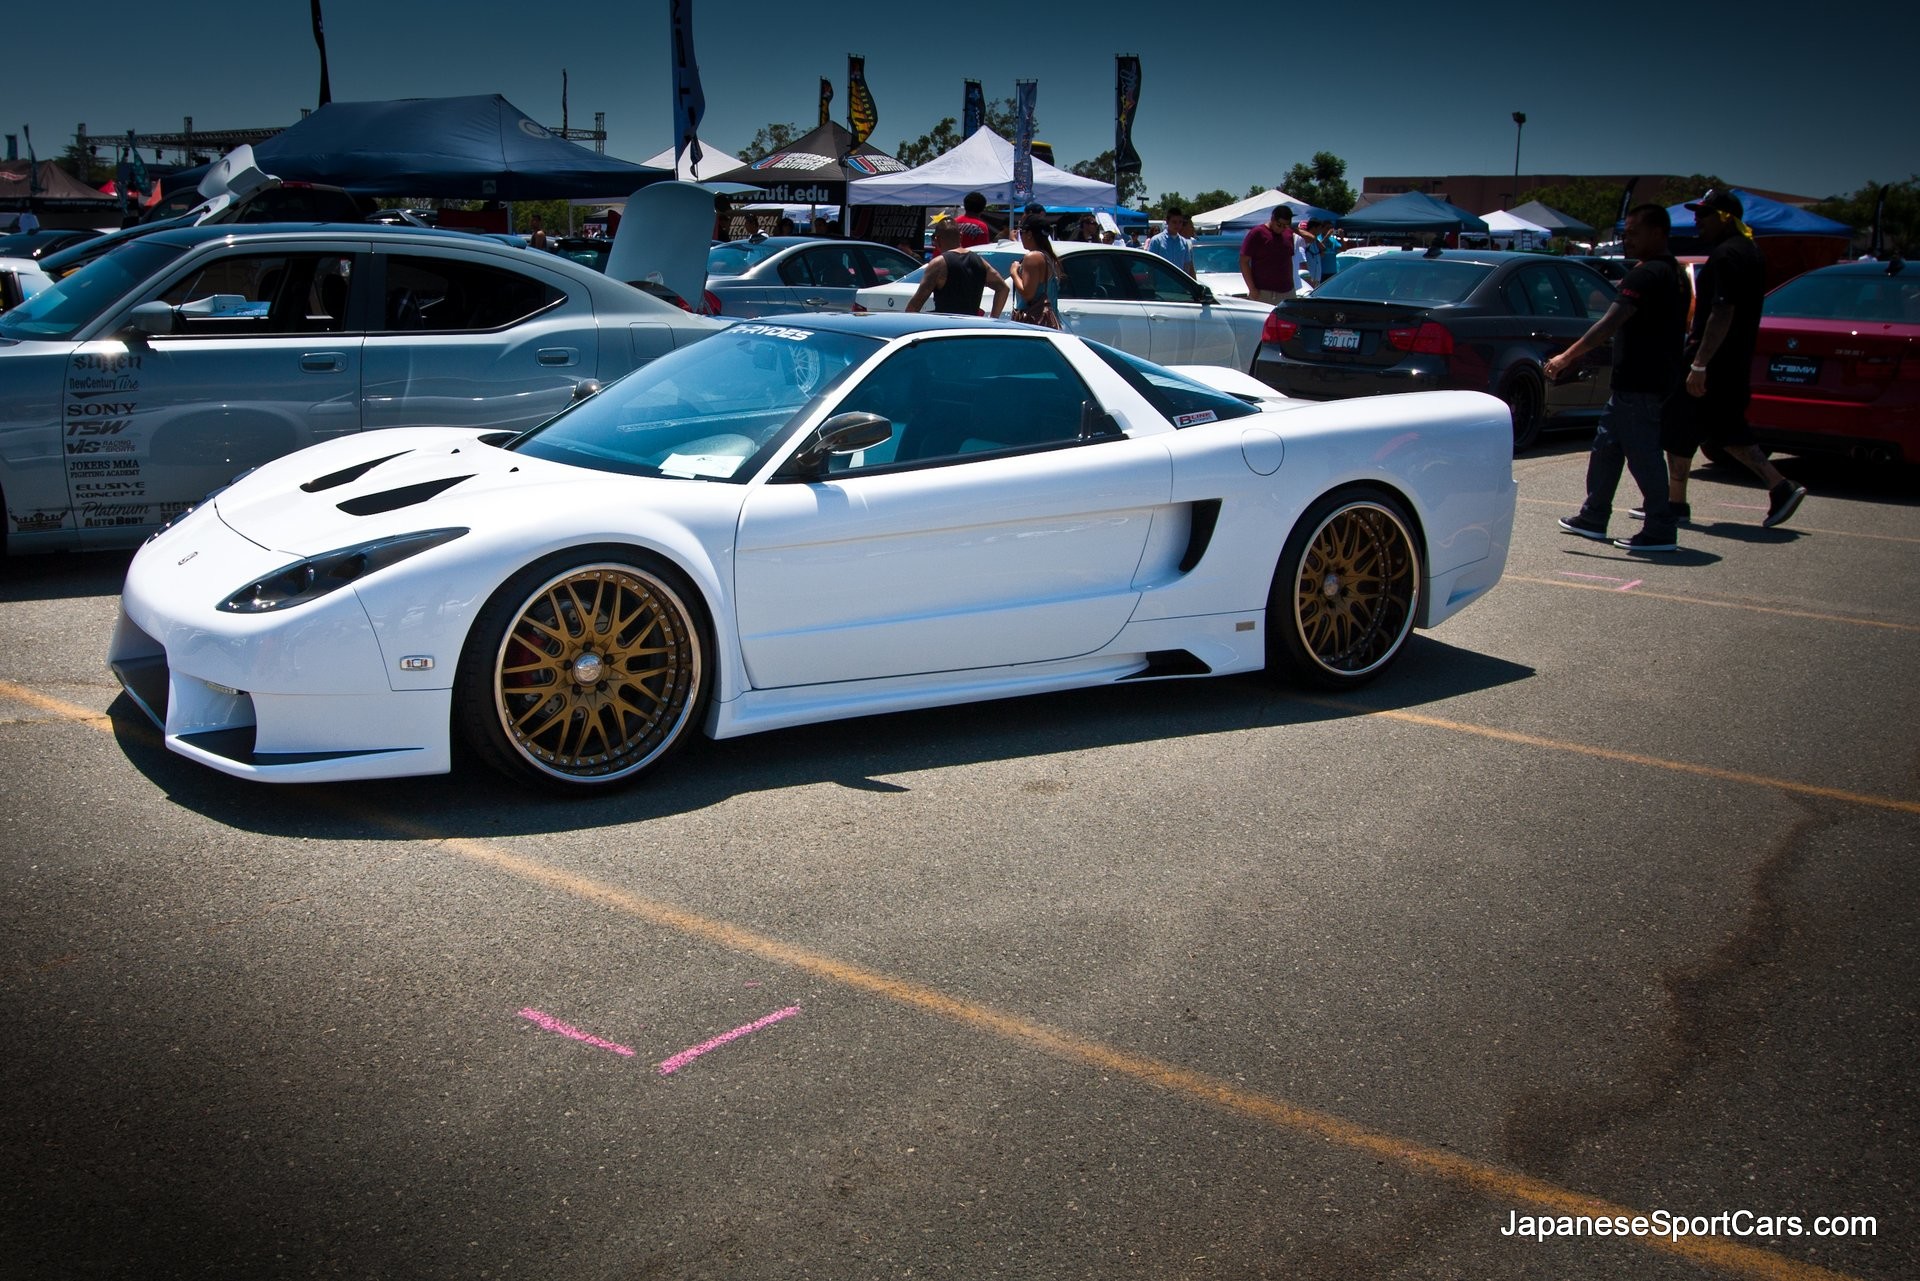 1920x1281 1991 Acura NSX with Veilside Fortune NSX Body Kit - Picture Number: 585651